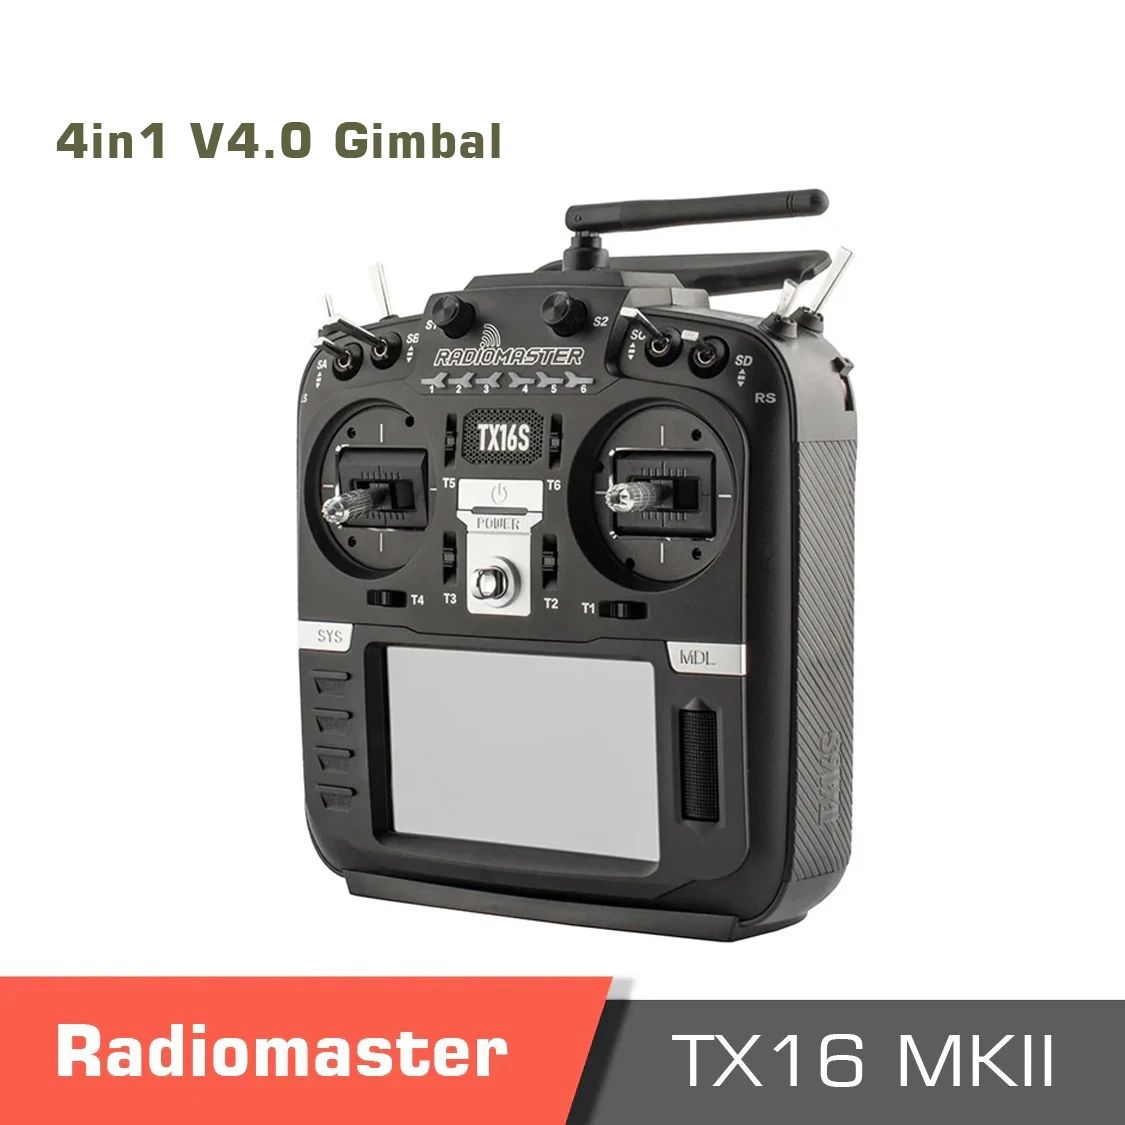 Colore: 4in1 v4.0 gimbal